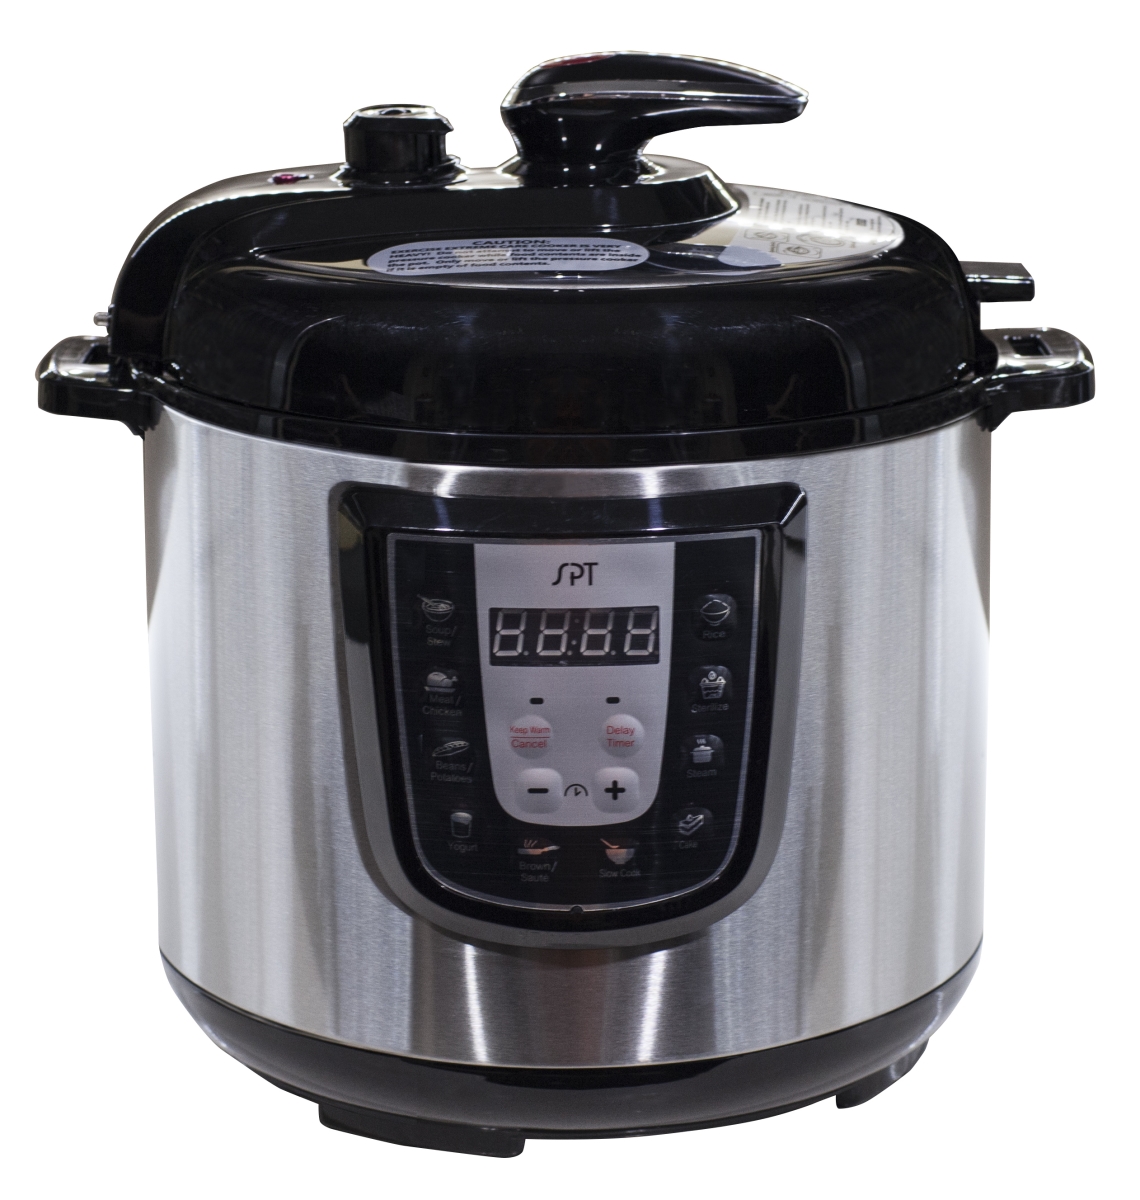 Epc-14d 6 Qt Electric Stainless Steel Pressure Cooker